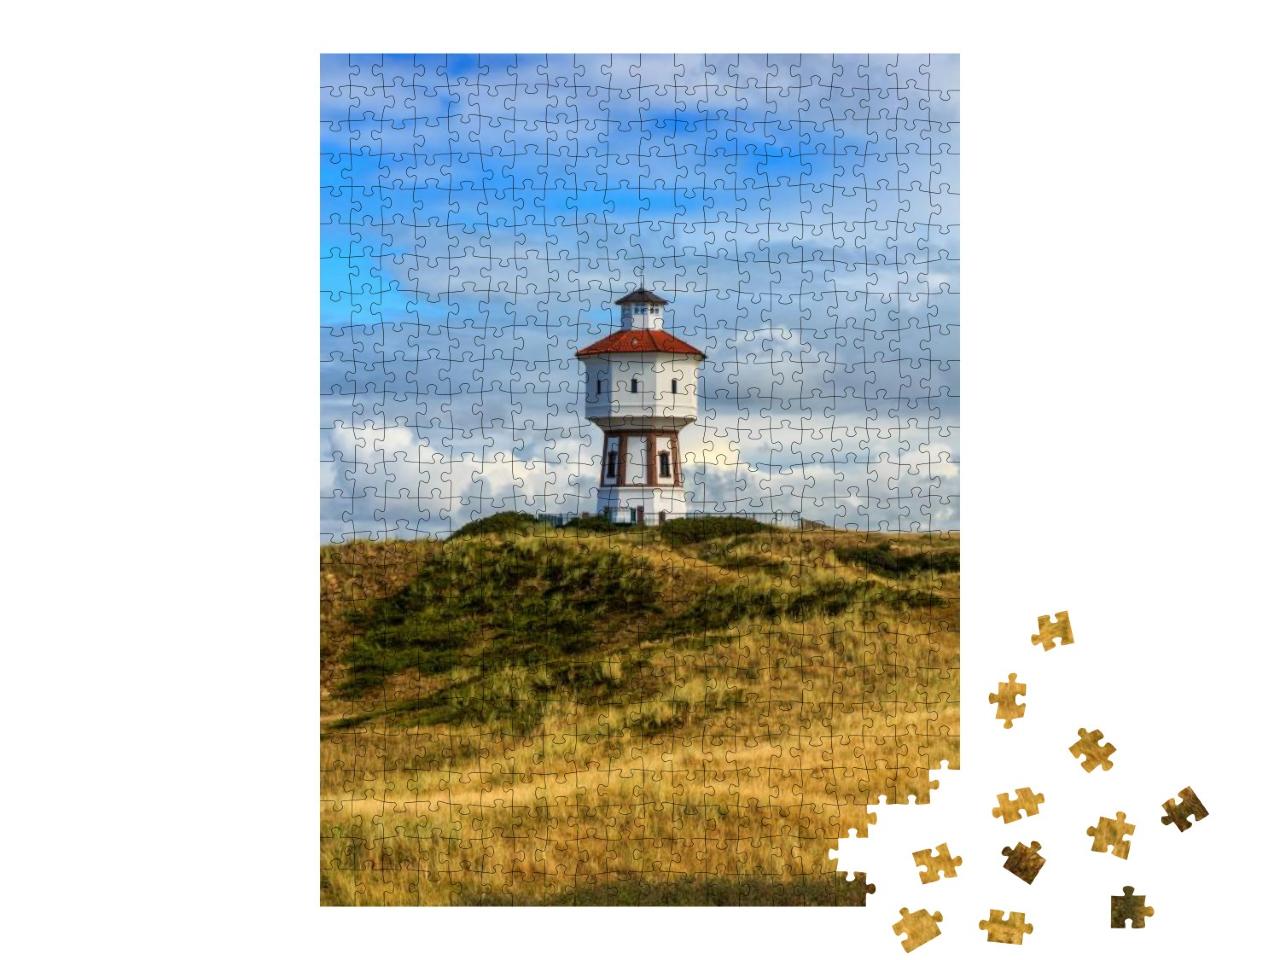 A Lighthouse At the Island of Langeoog, Lower Saxony, Ger... Jigsaw Puzzle with 500 pieces